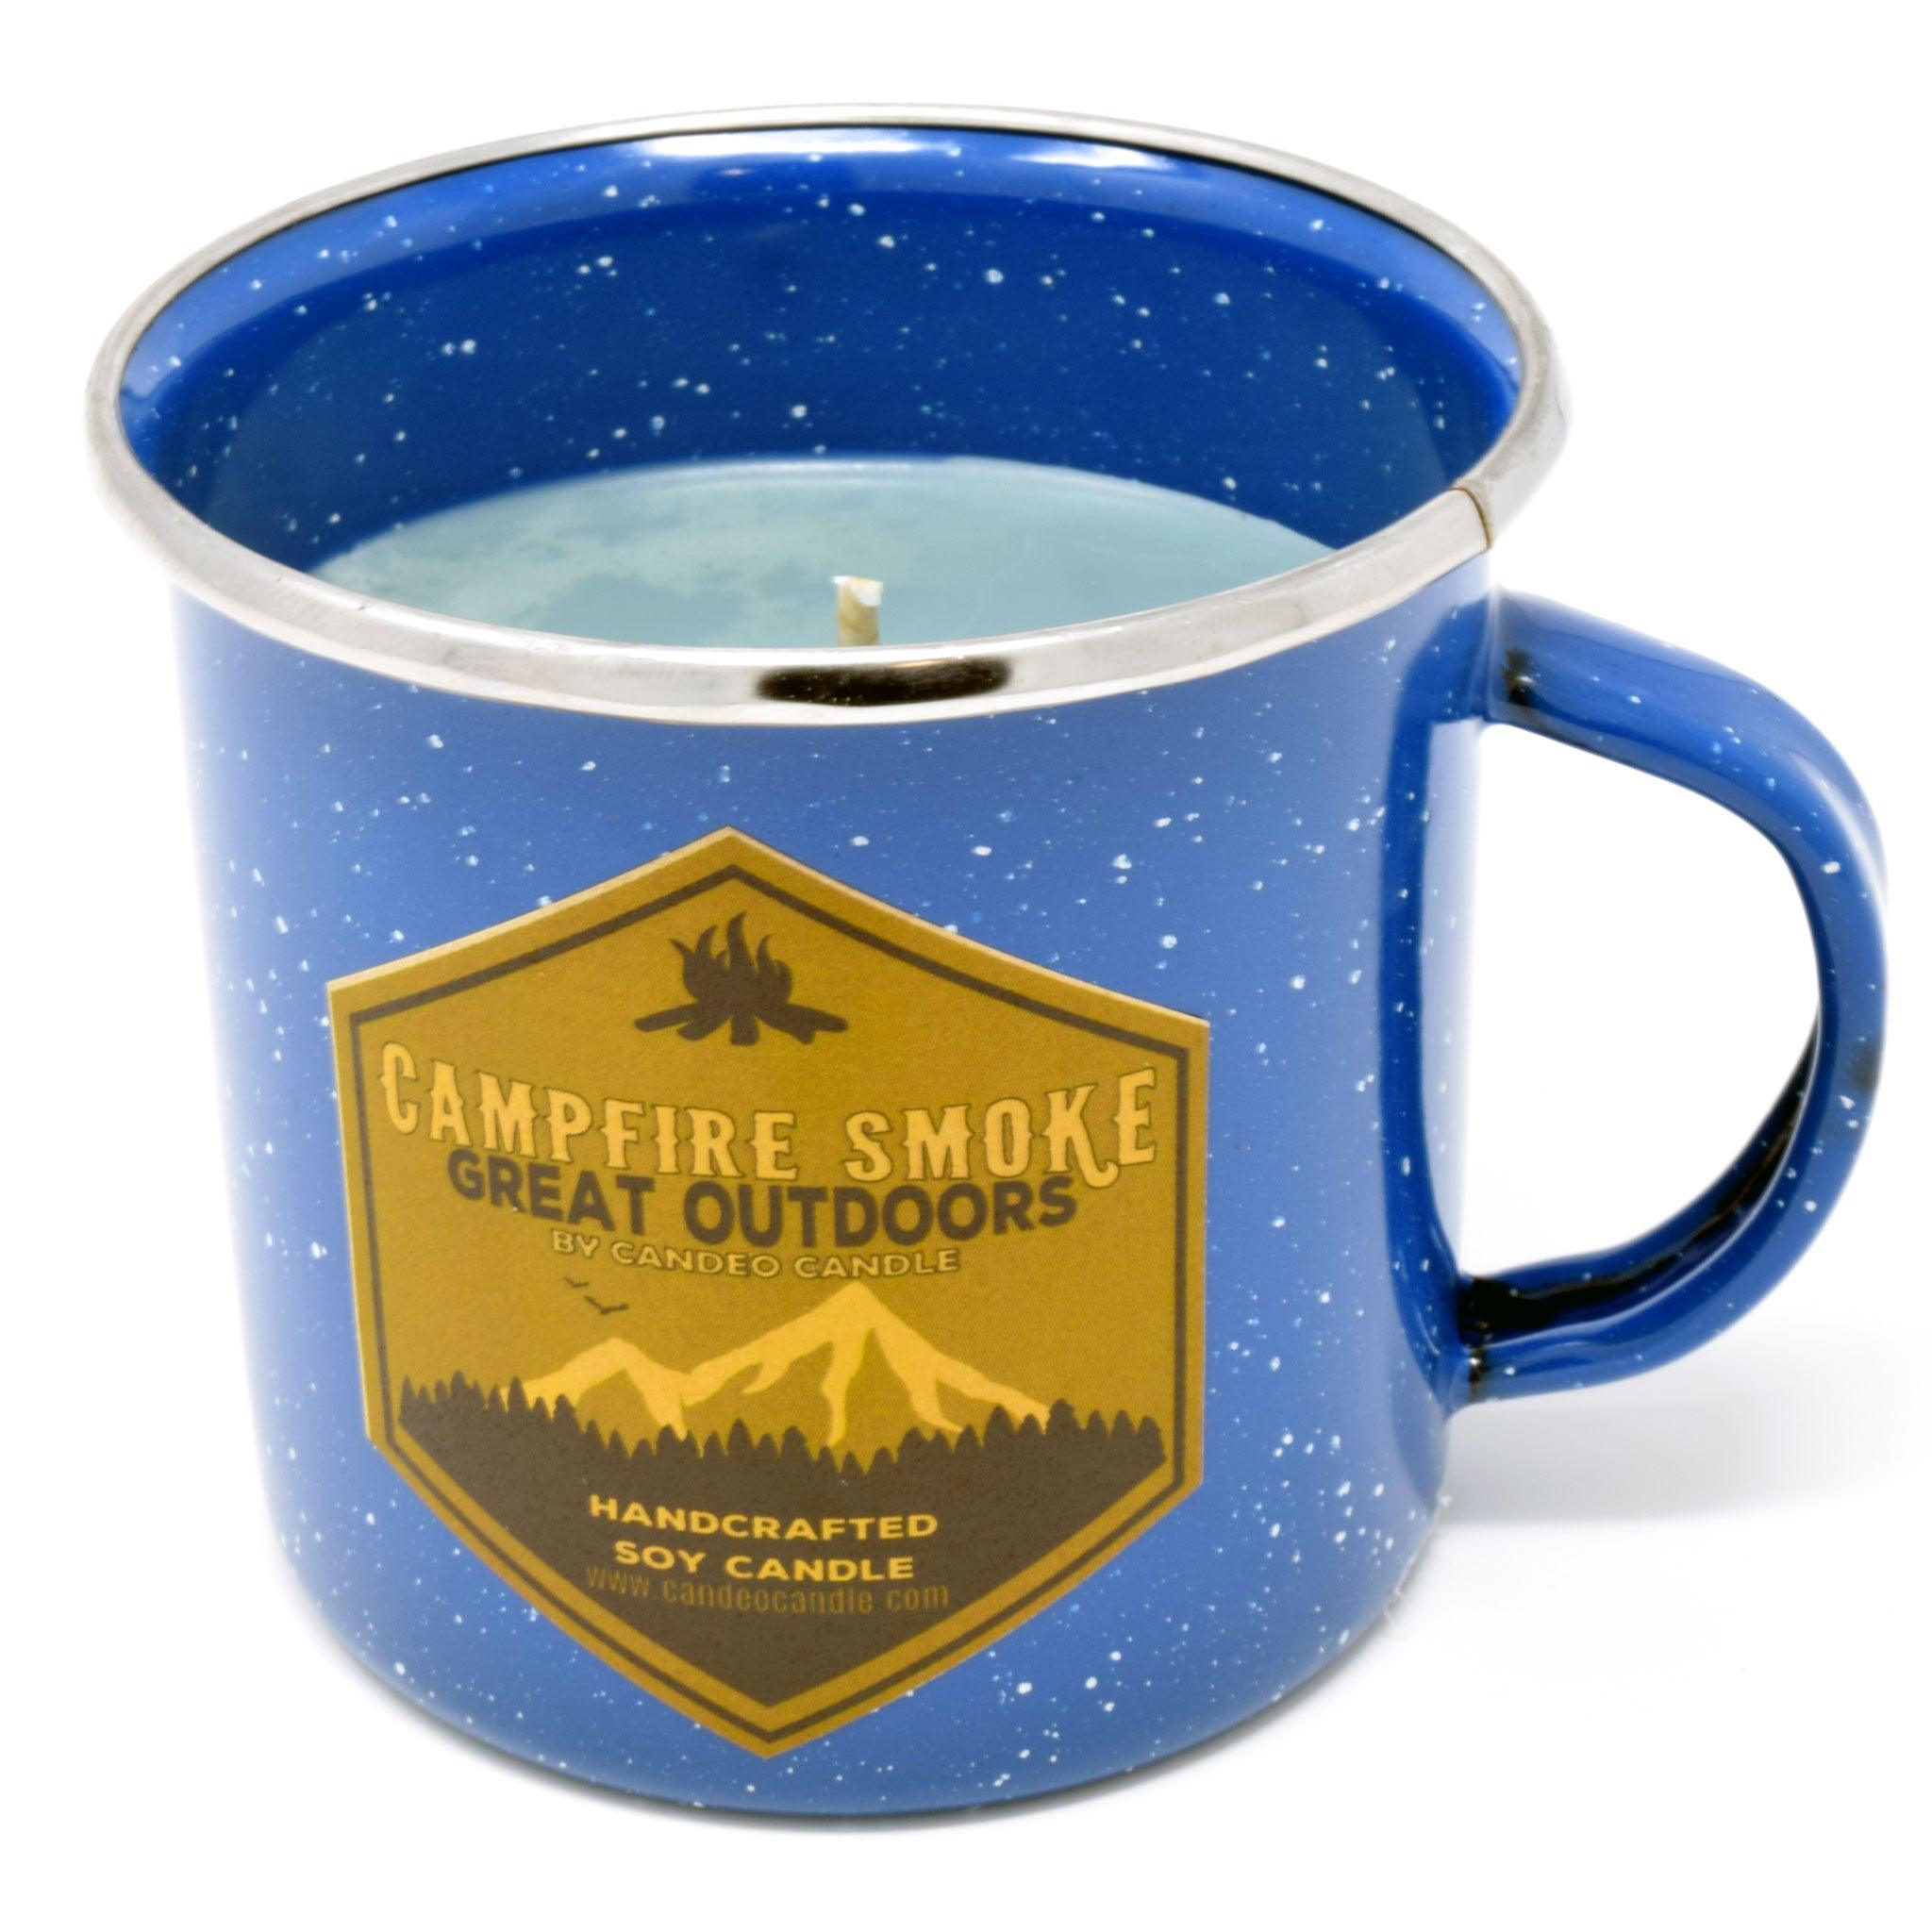 Campfire Smoke, Soy Candle in Enamel Camping Mug, 10oz - Candeo Candle